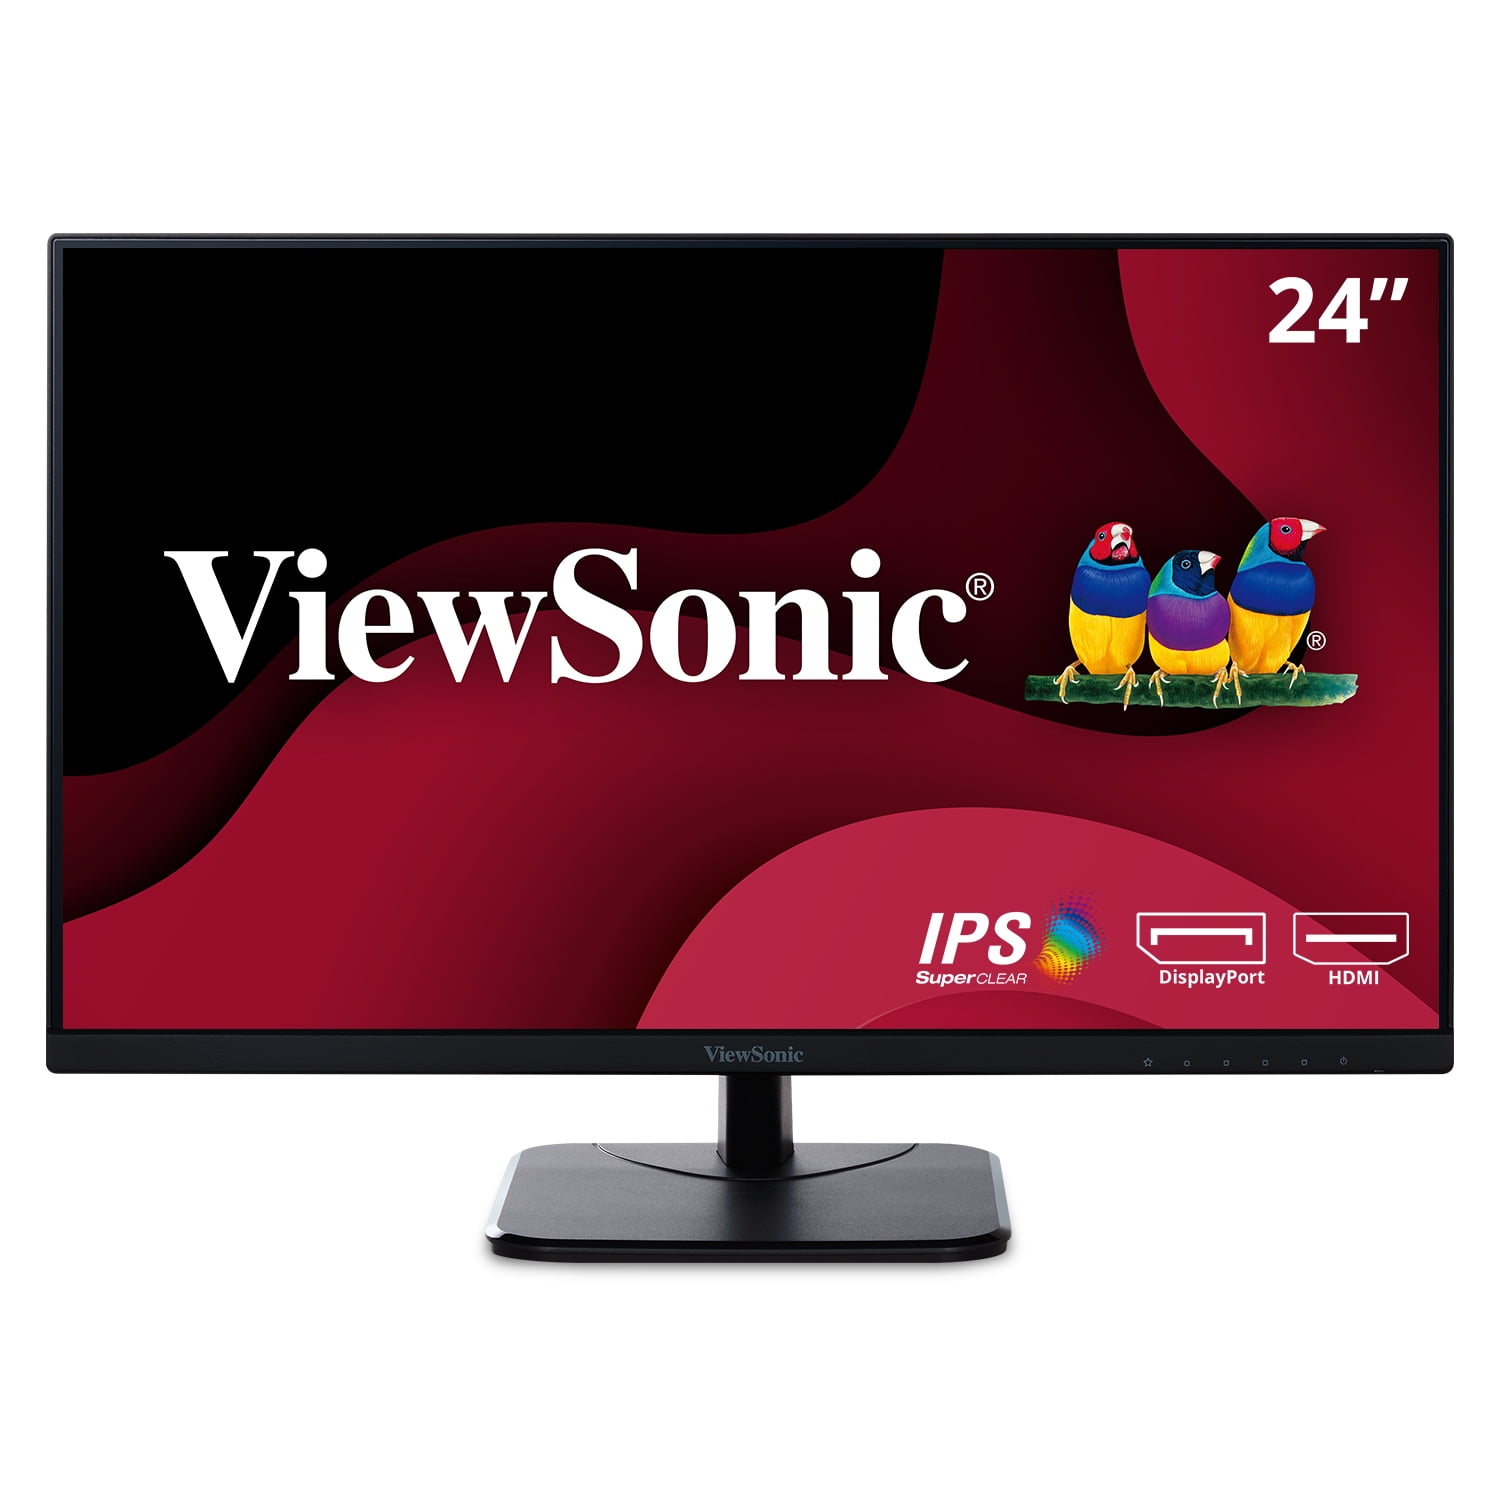 Picture of Viewsonic VA2456-MHD 24 in. Full-HD Super Clear IPS LED Monitor